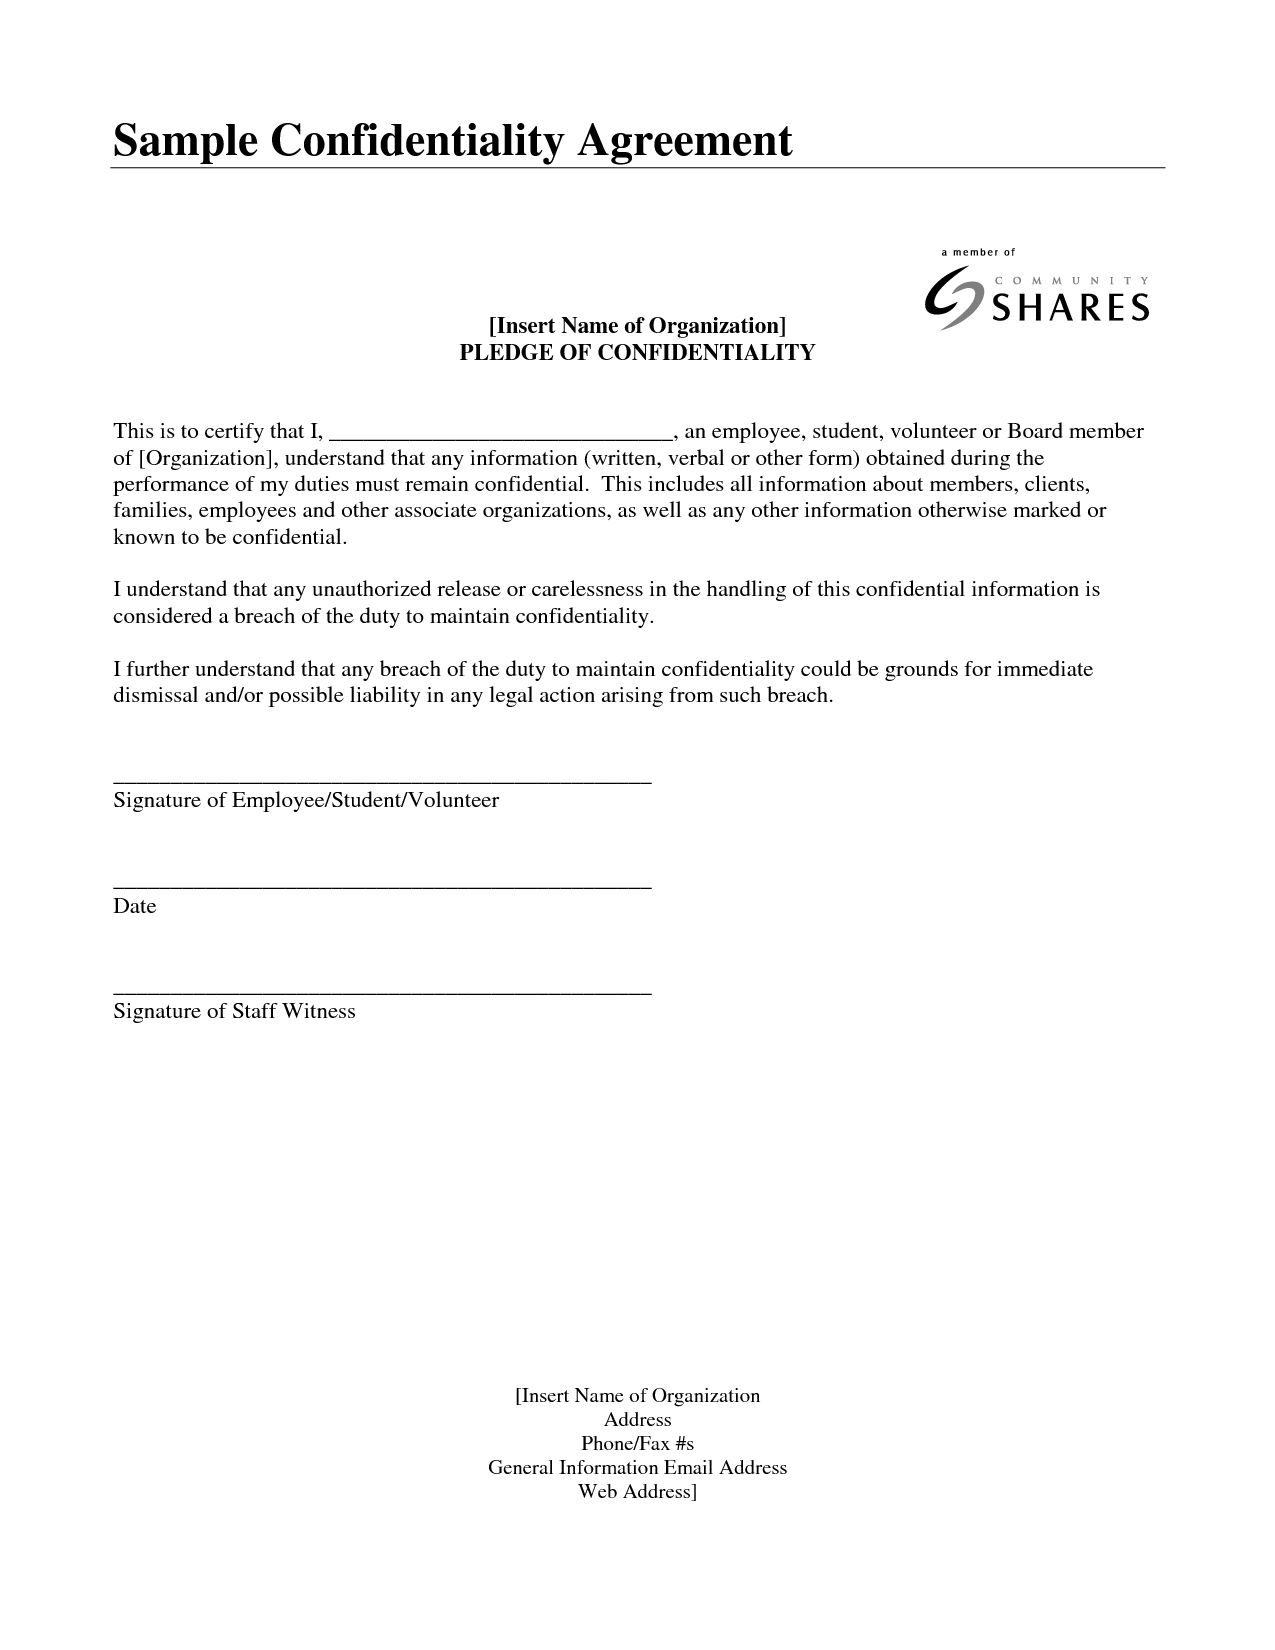 confidentiality-agreement-sample-free-printable-documents